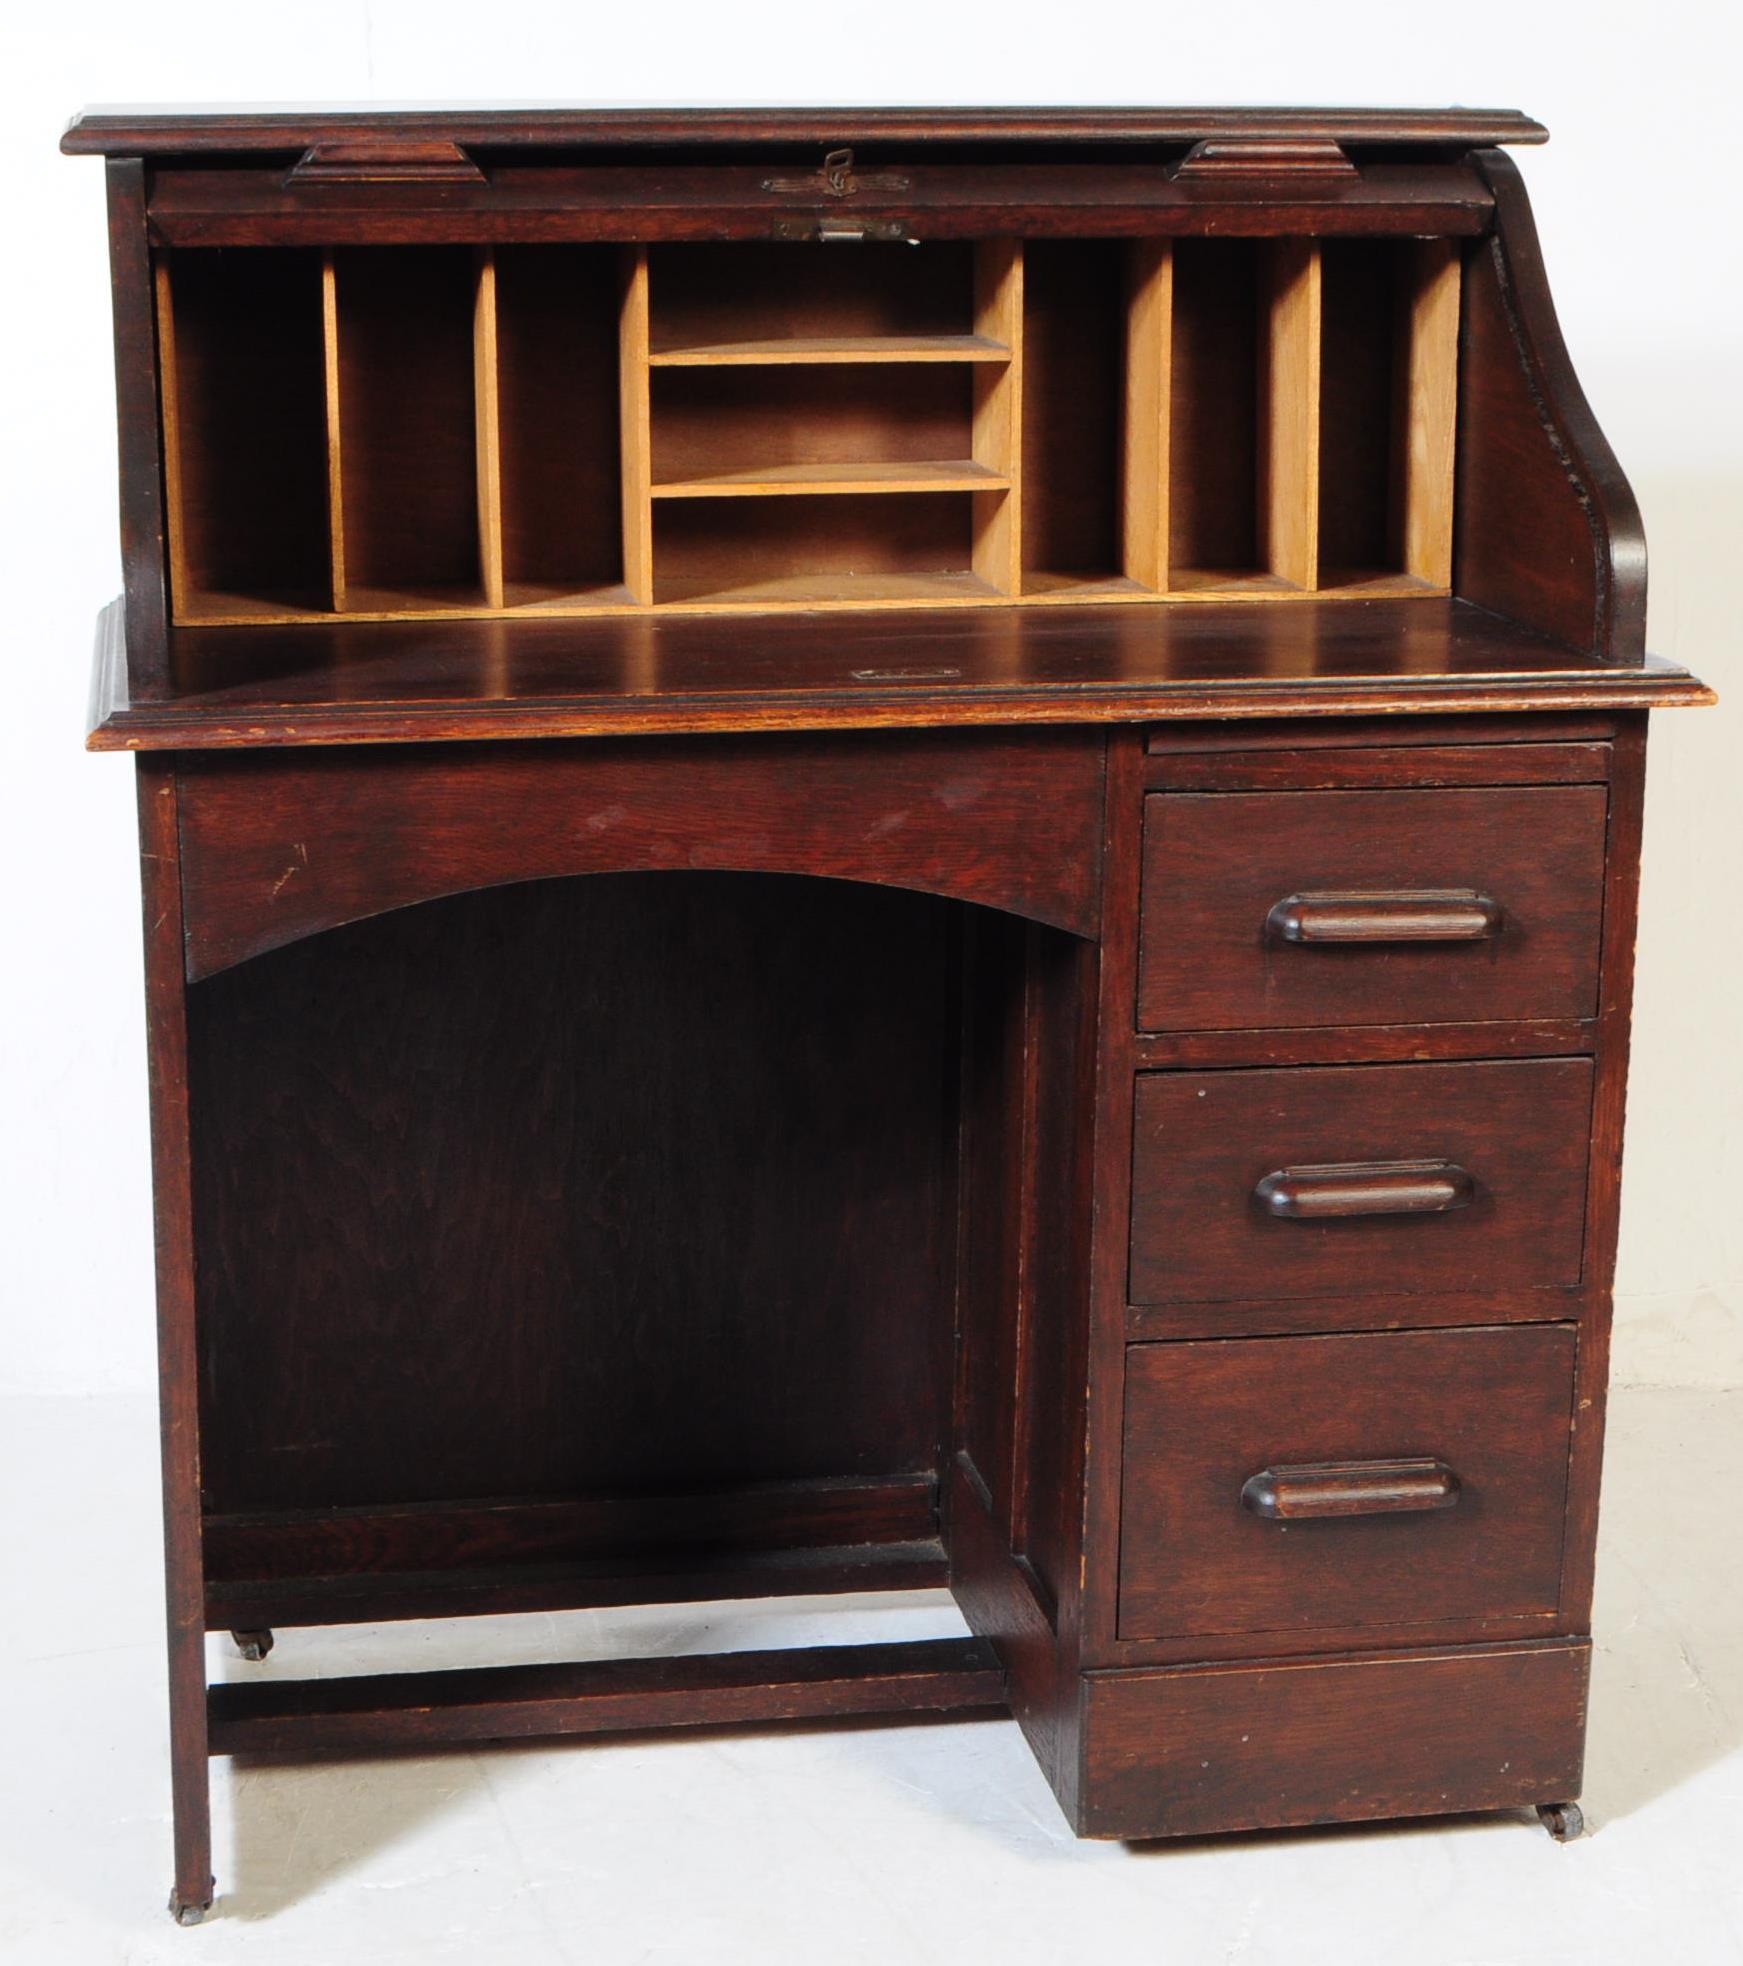 EARLY 20TH CENTURY MAHOGANY ROLL TOP DESK - Image 2 of 7